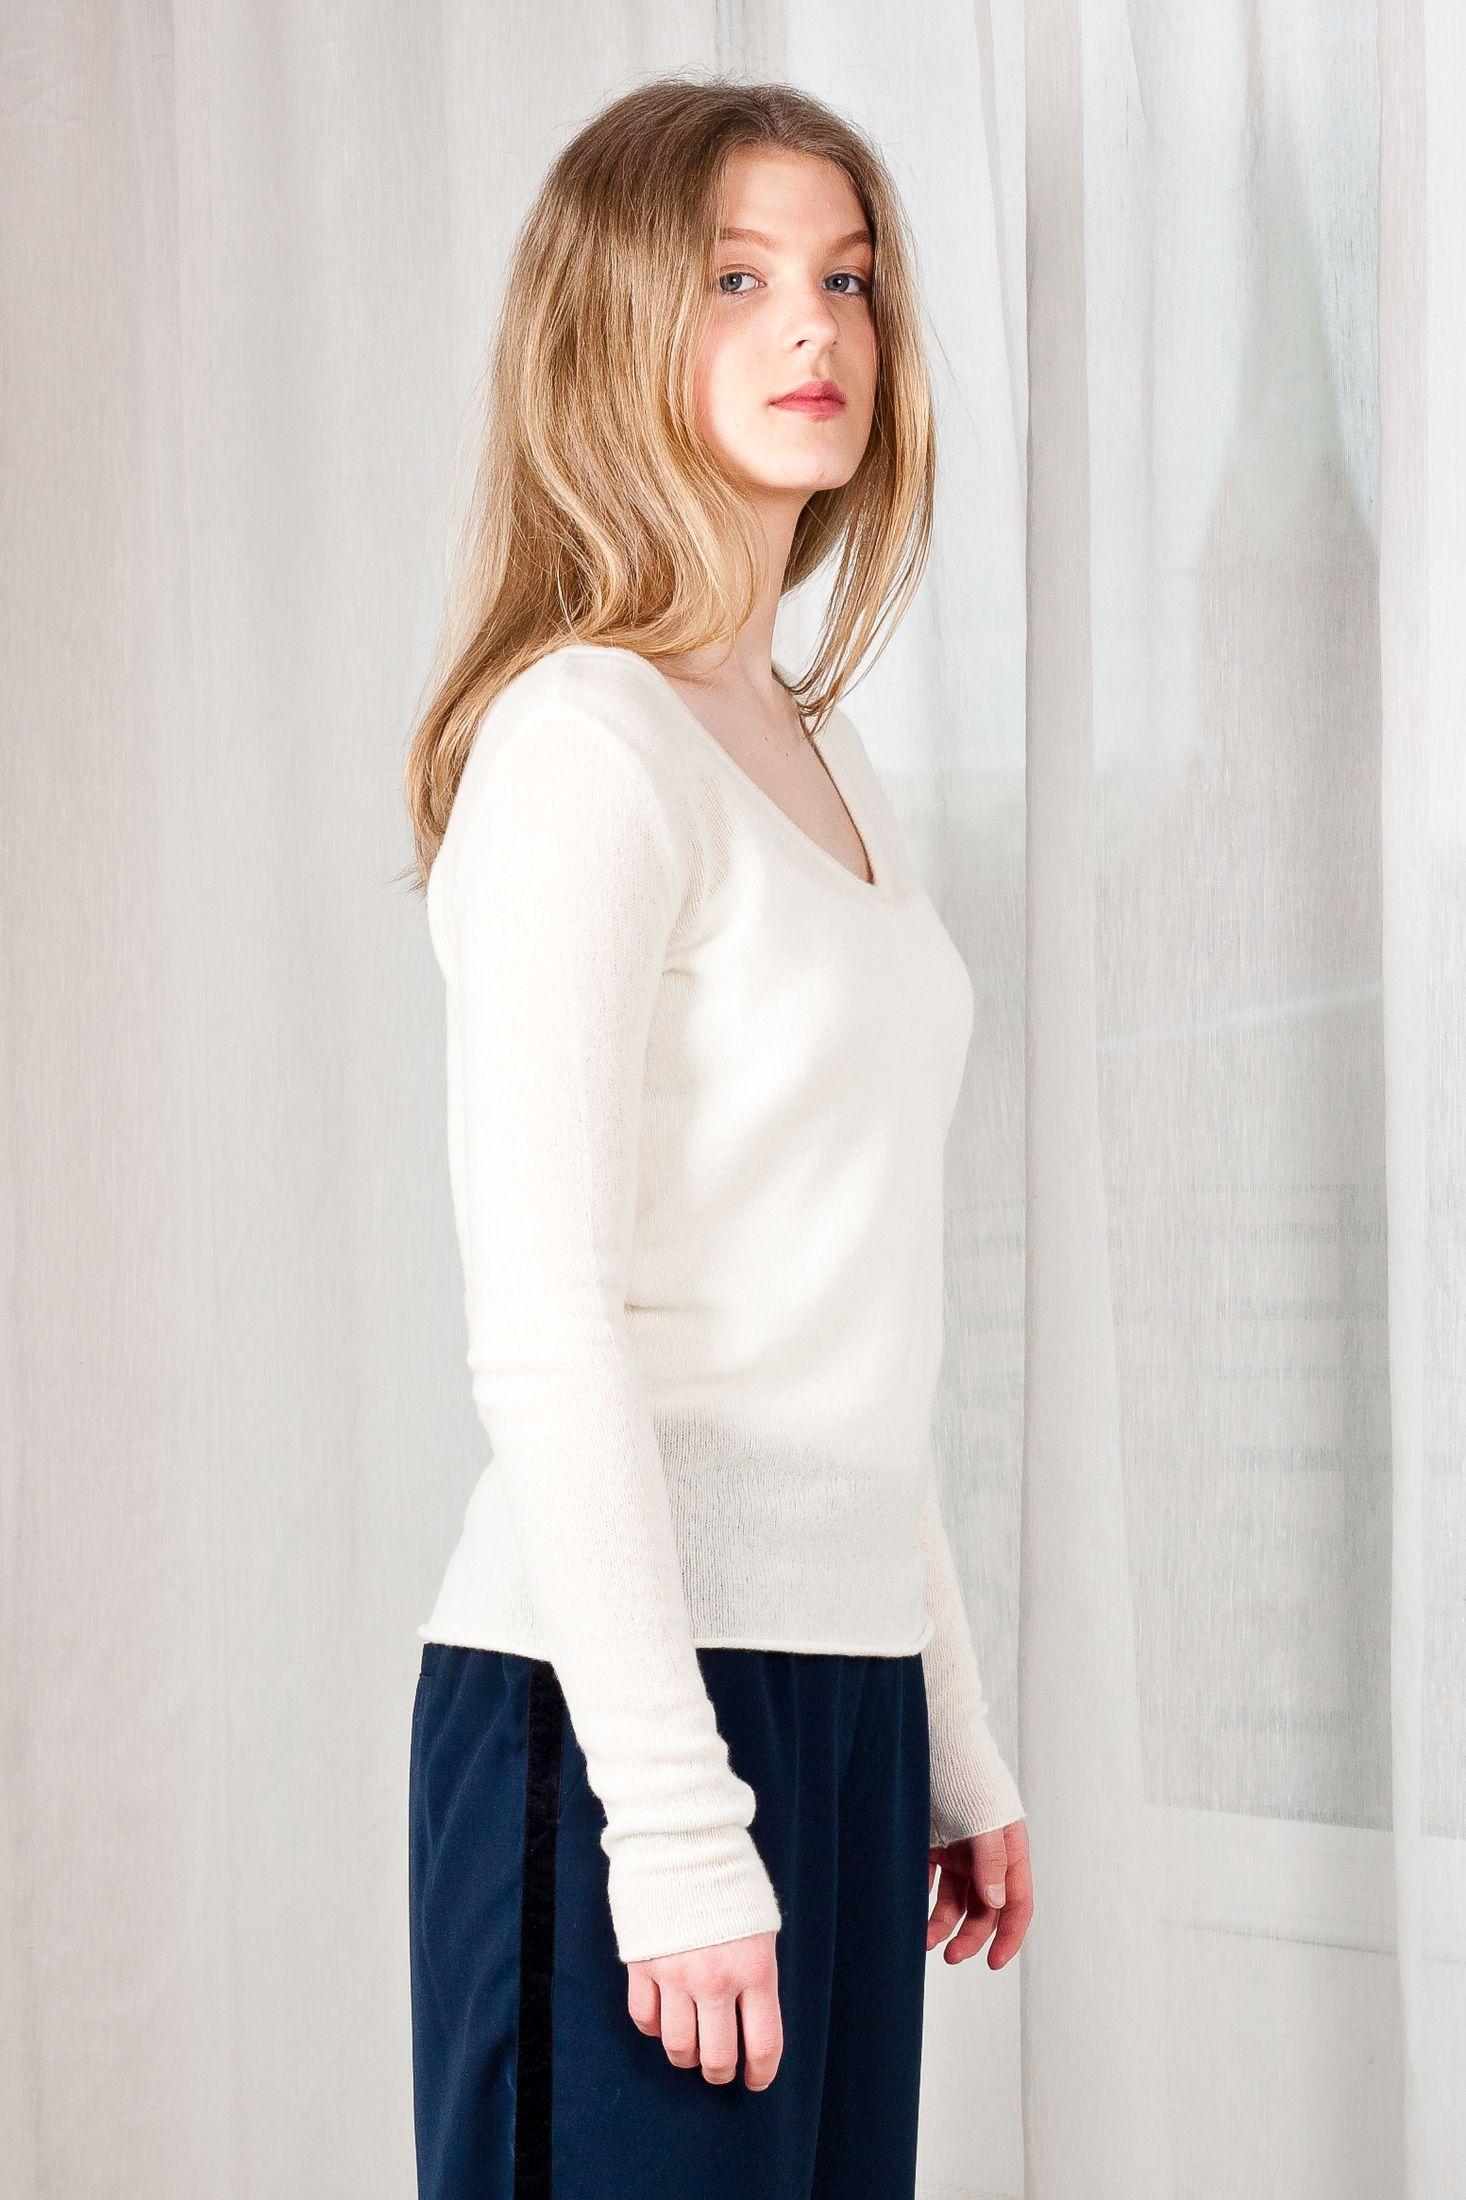 Wrap yourself in the sumptuous comfort of MARGO V by Krista Elsta, an off-white cashmere V-neck sweater. Effortless style and cozy luxury combined.